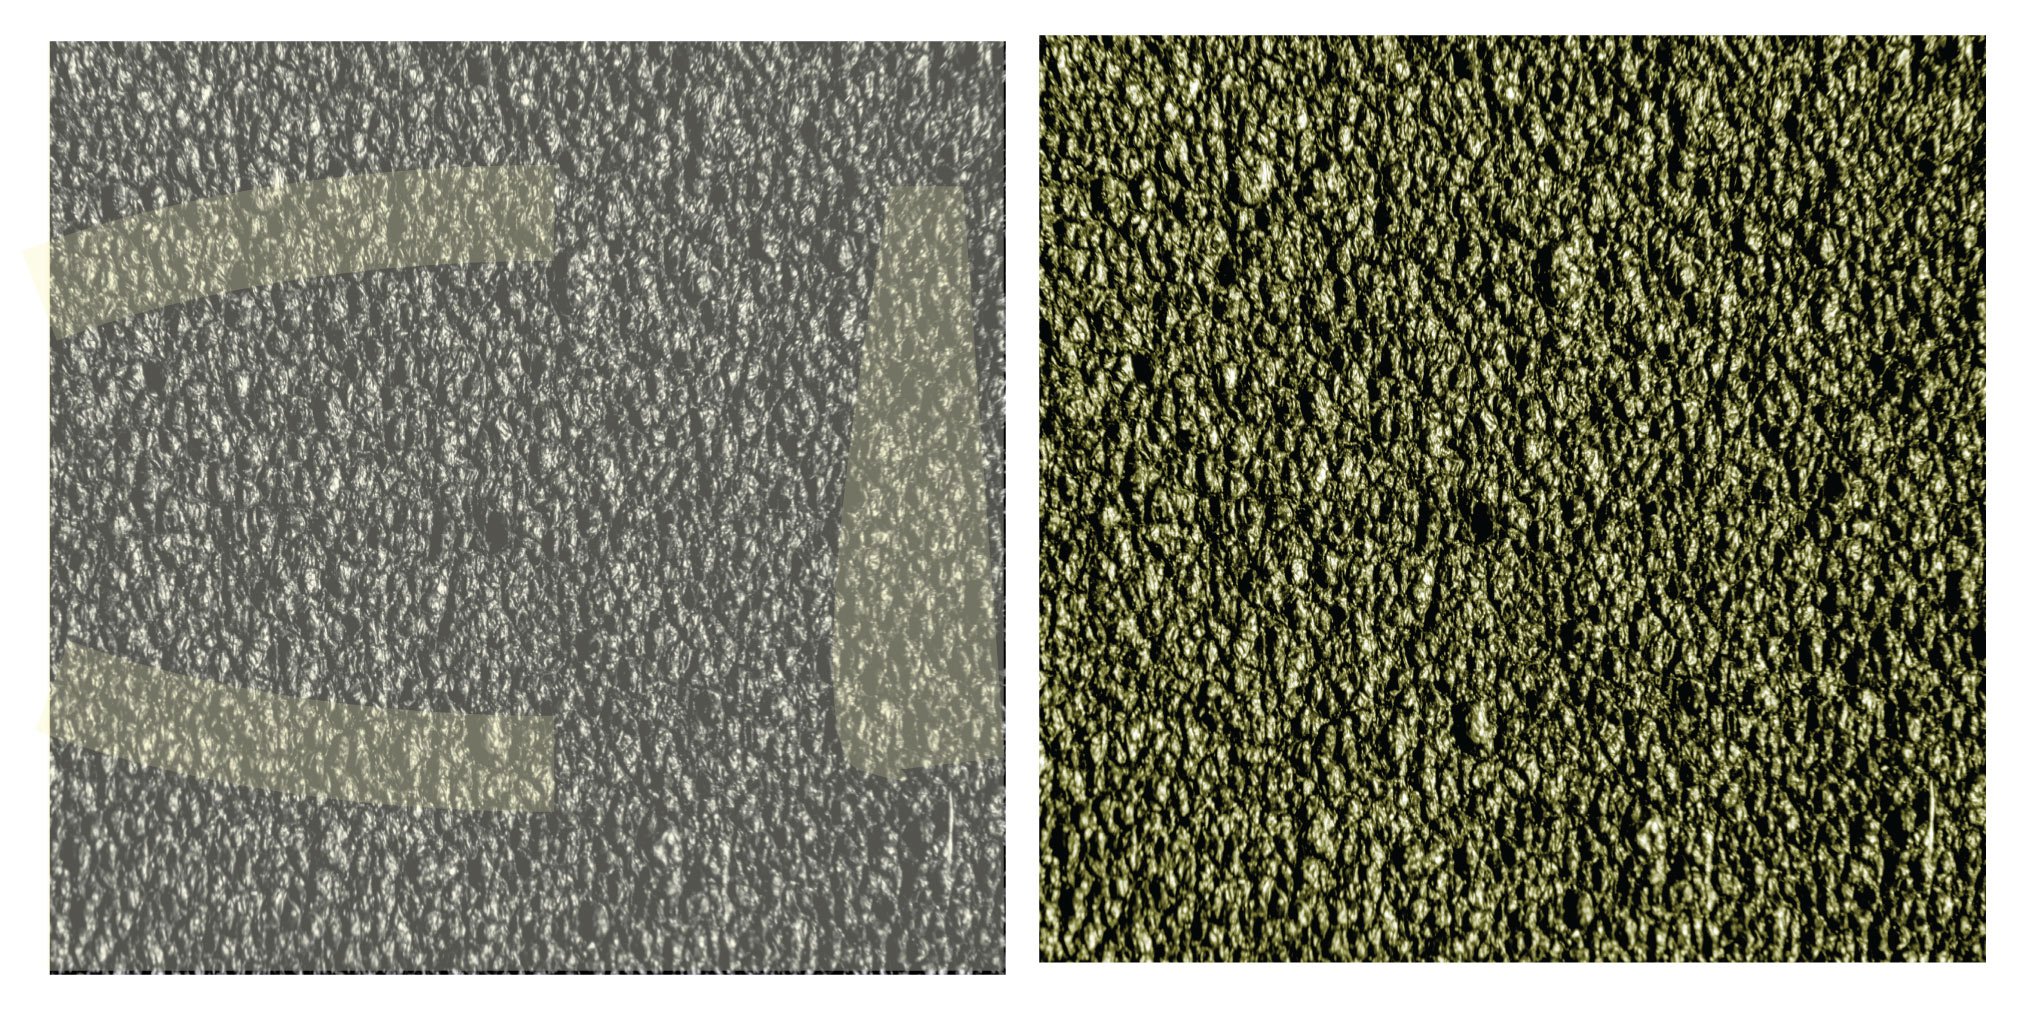 recognizing-counterfiet-component-top-and-bottom-surface-texture.jpg